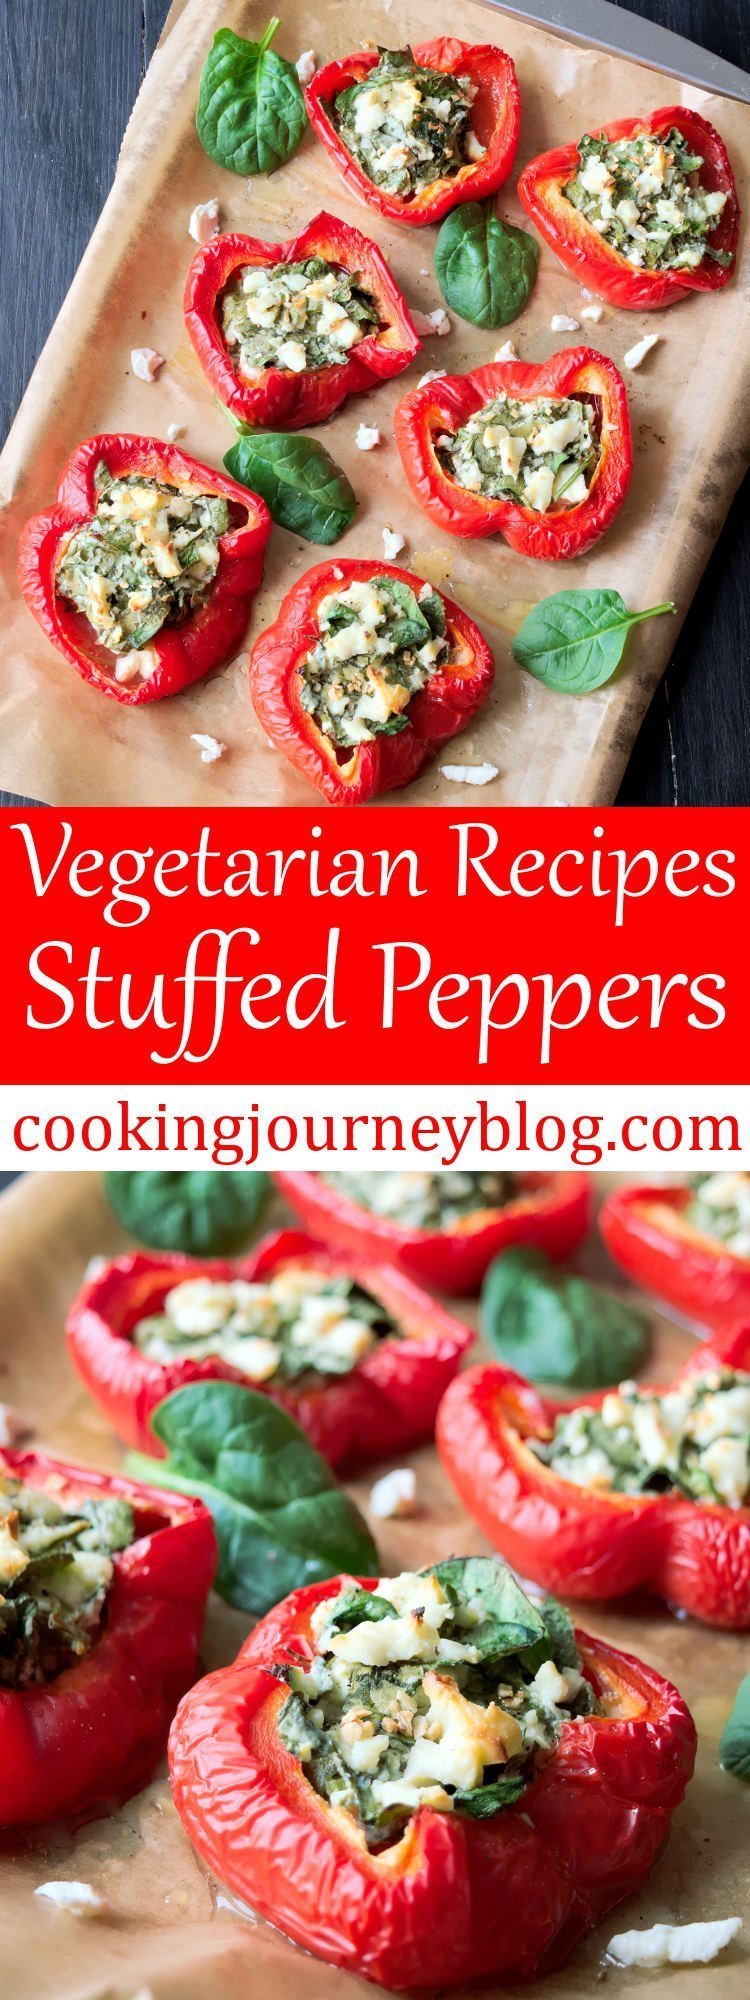 Baked stuffed peppers is one of tasty and healthy vegetarian recipes to prepare straight ahead. If you are searching for easy snacks to make, these stuffed peppers are just perfect! They are juicy, salty and addictive.